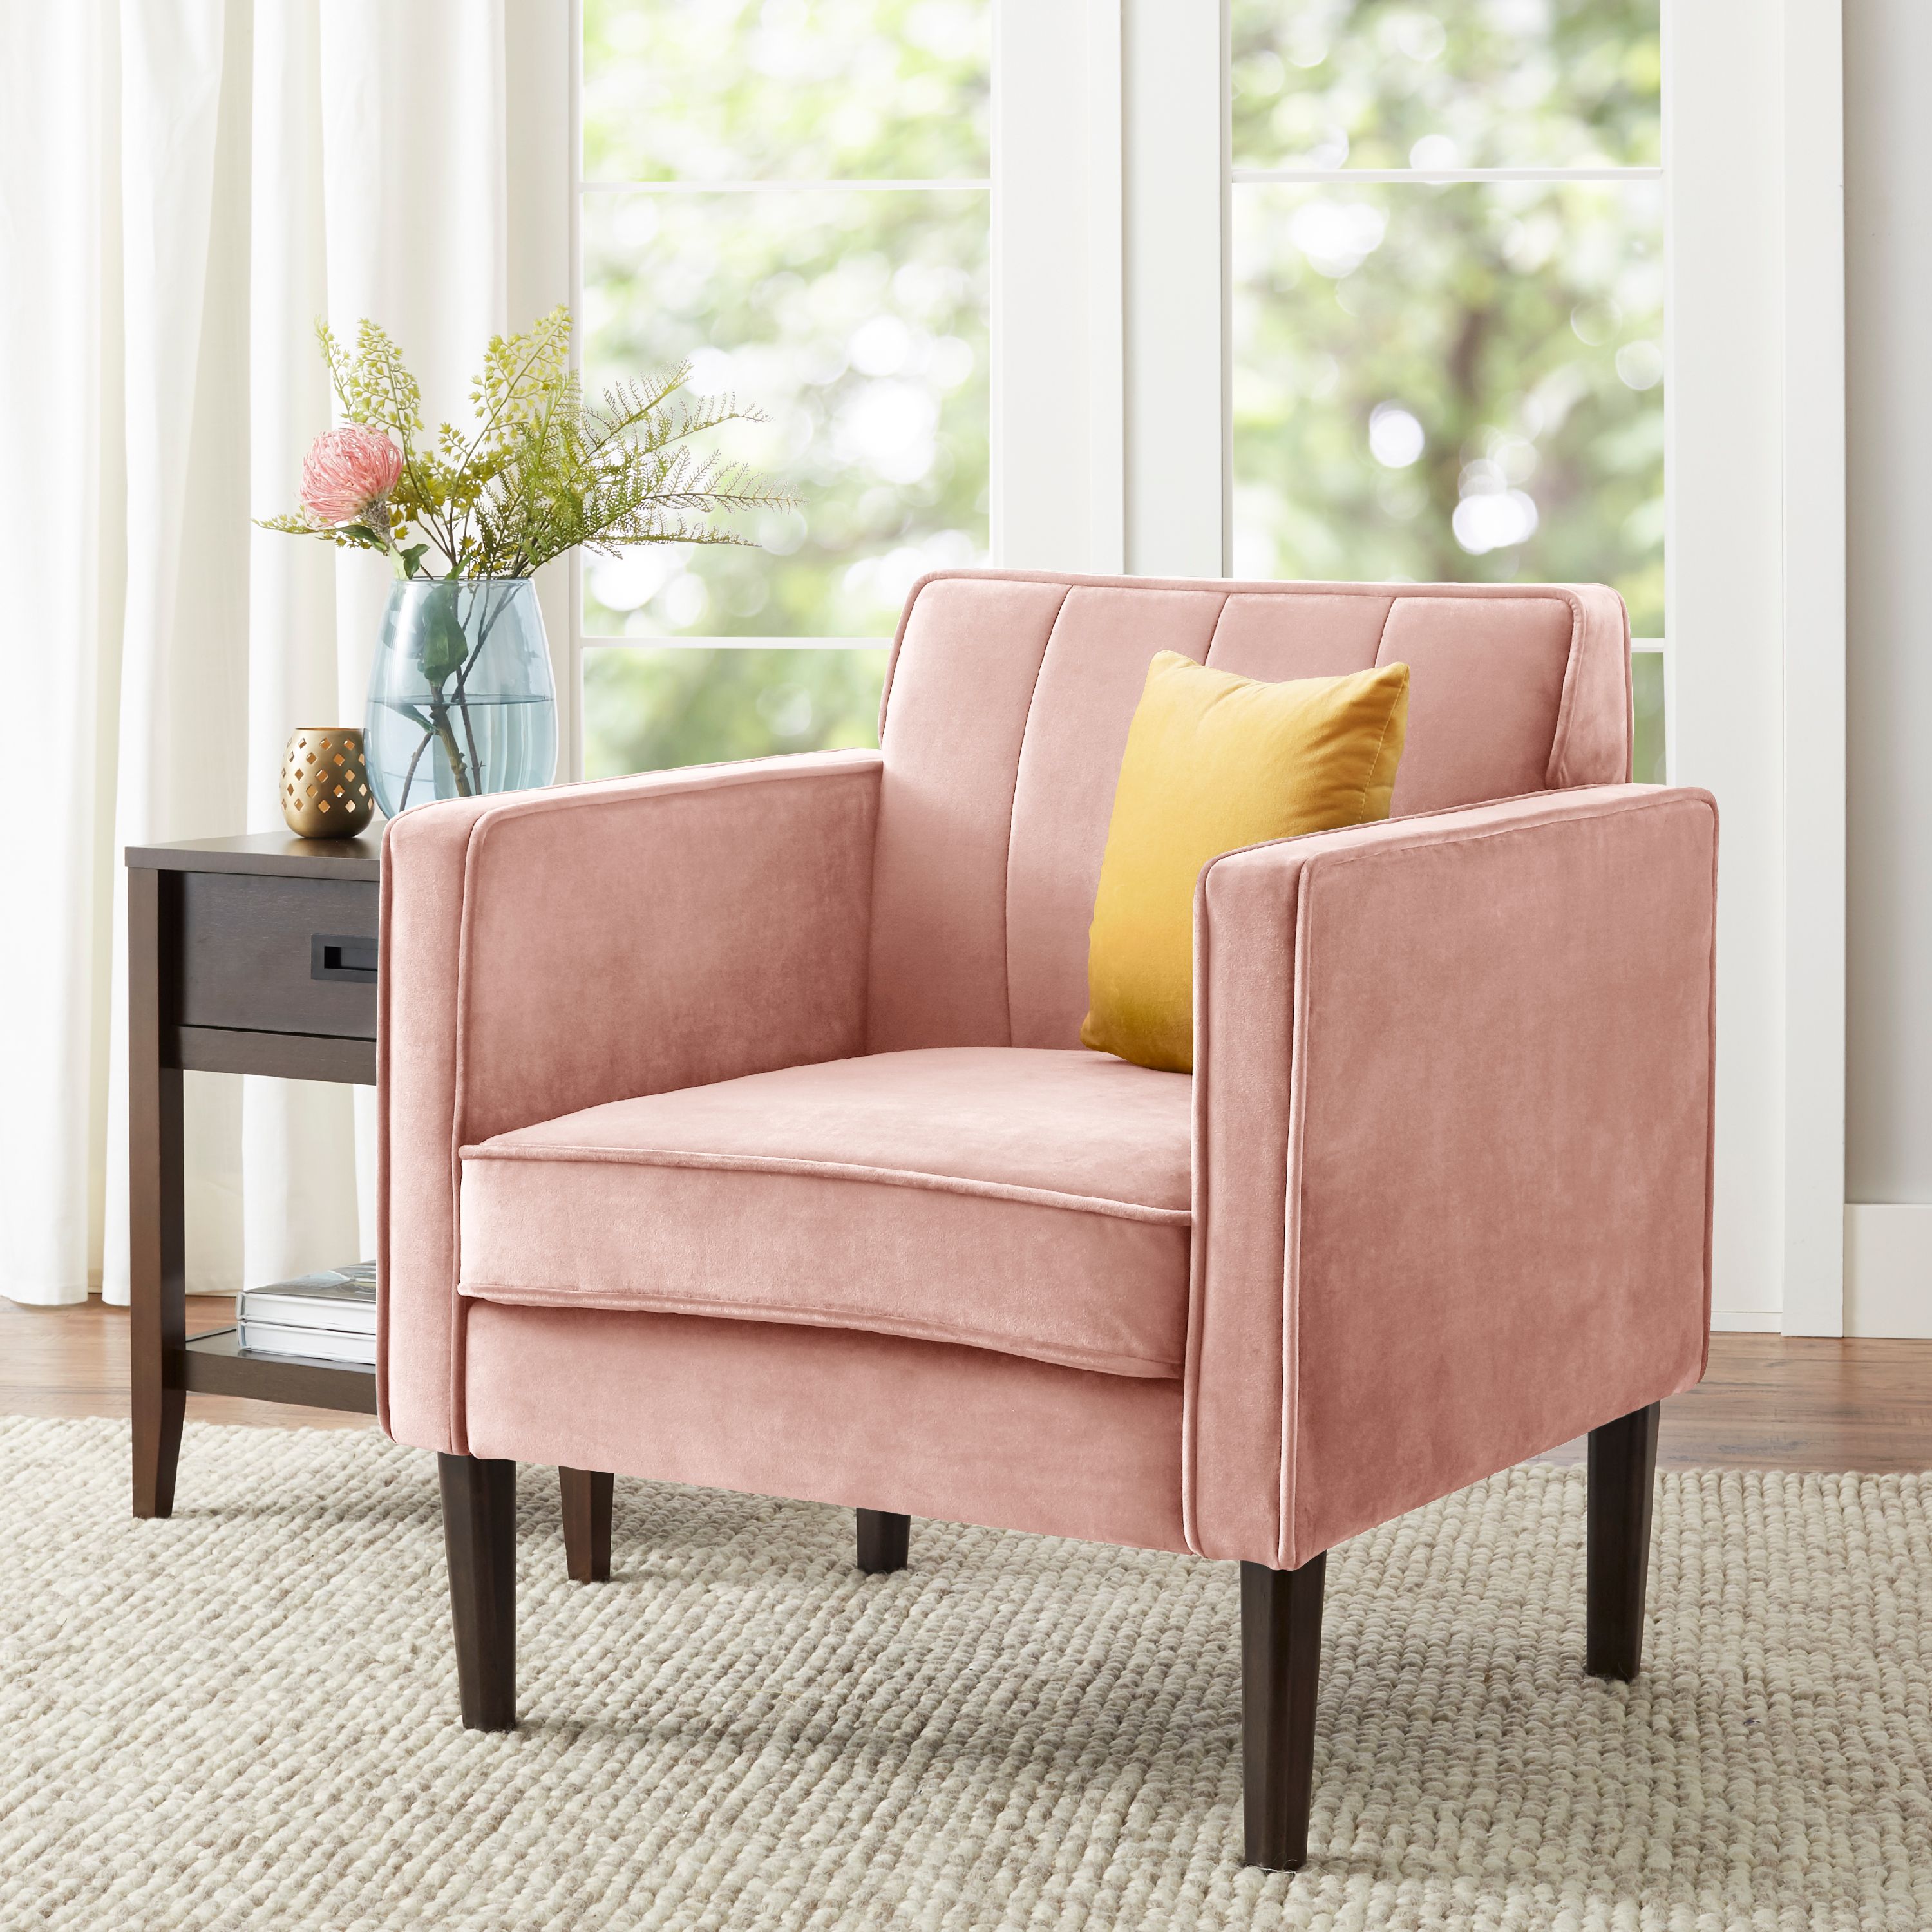 Better Homes & Gardens Marlowe Lounge Chair, Pink - image 1 of 2